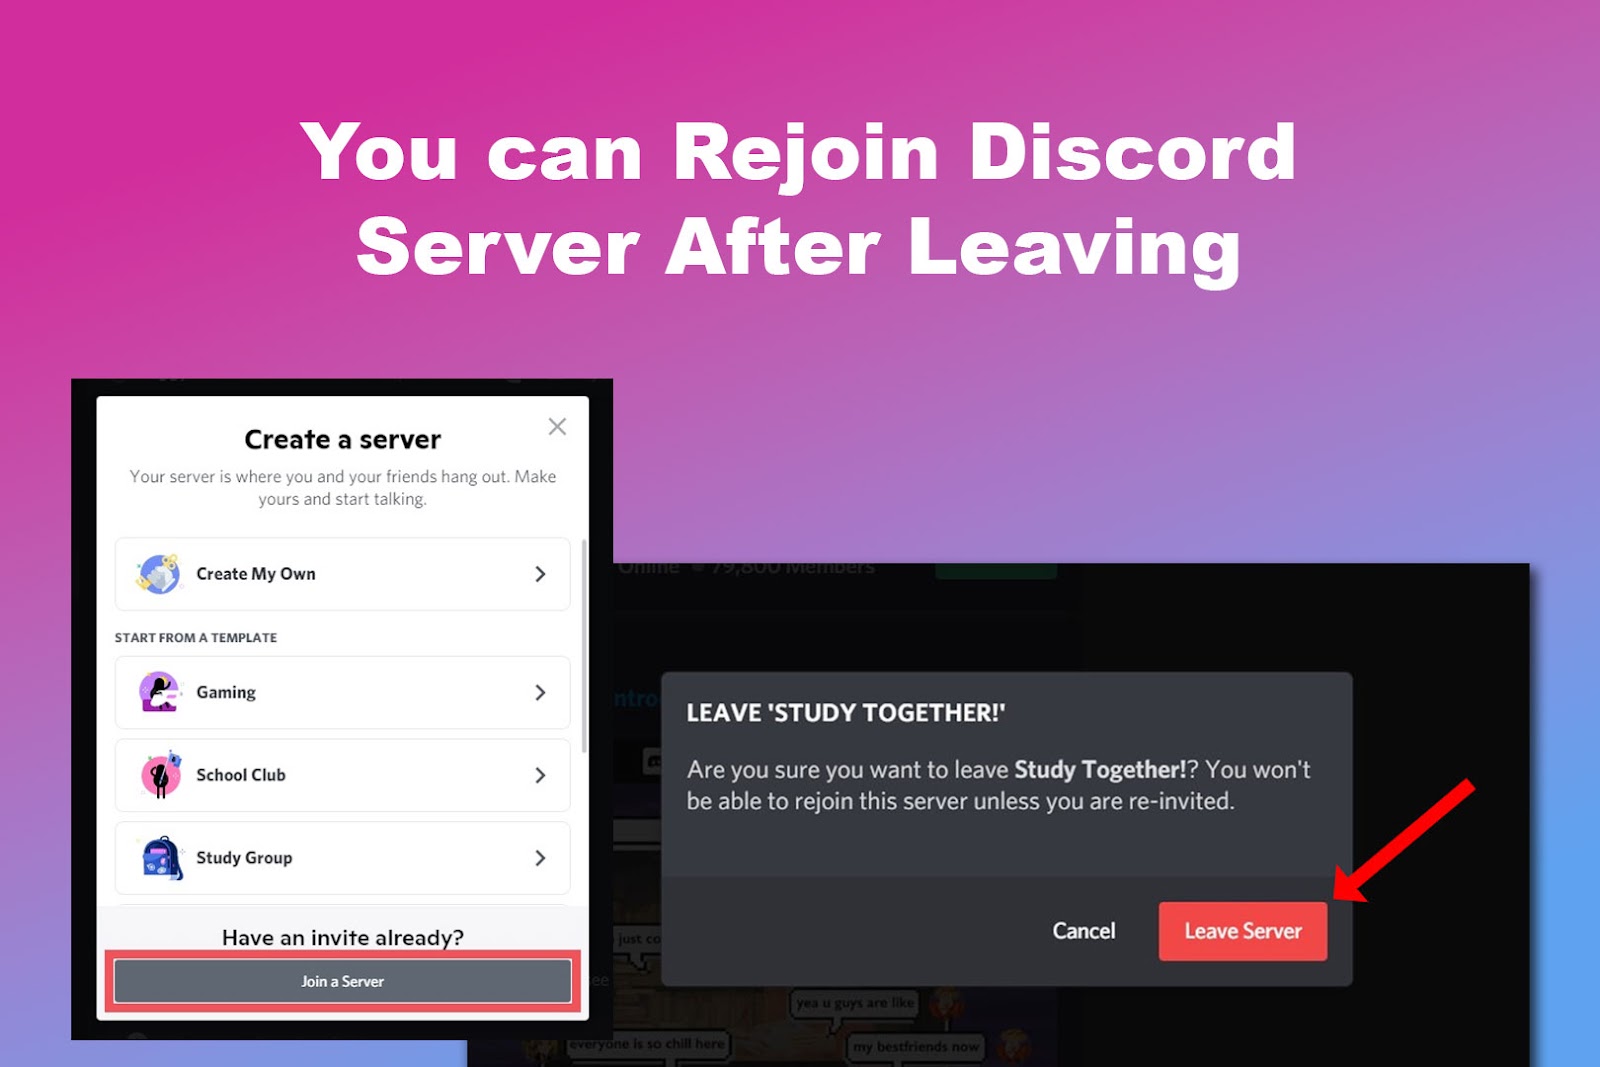 Can You Rejoin Discord Server After Leaving